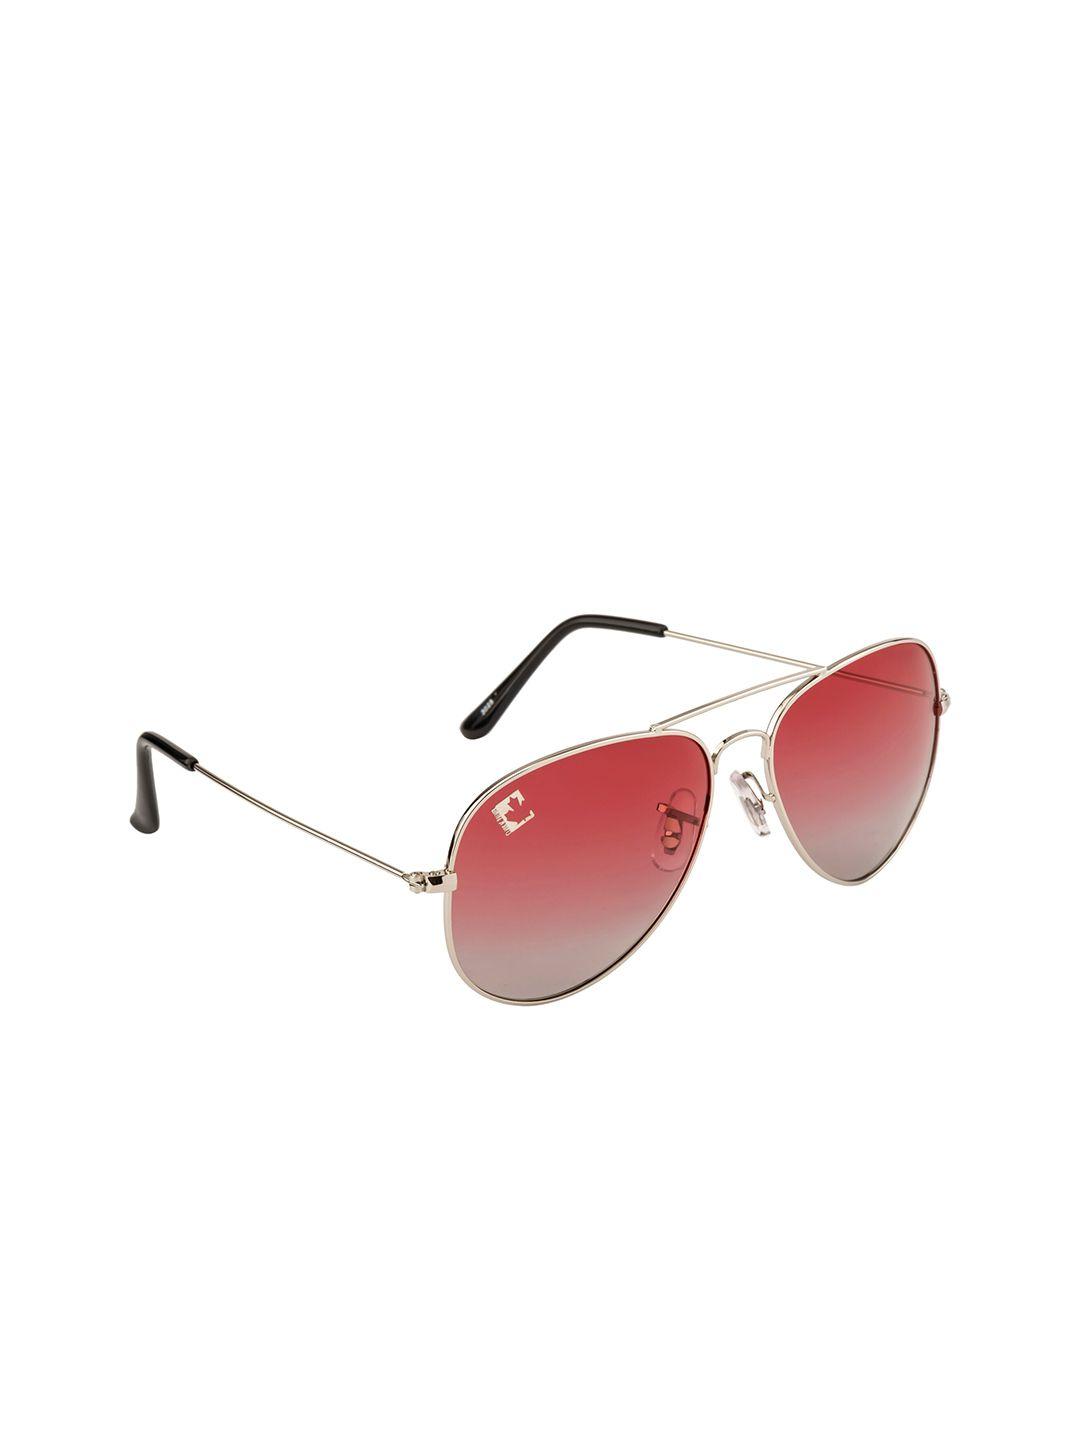 clark n palmer unisex aviator sunglasses with polarised and uv protected lens